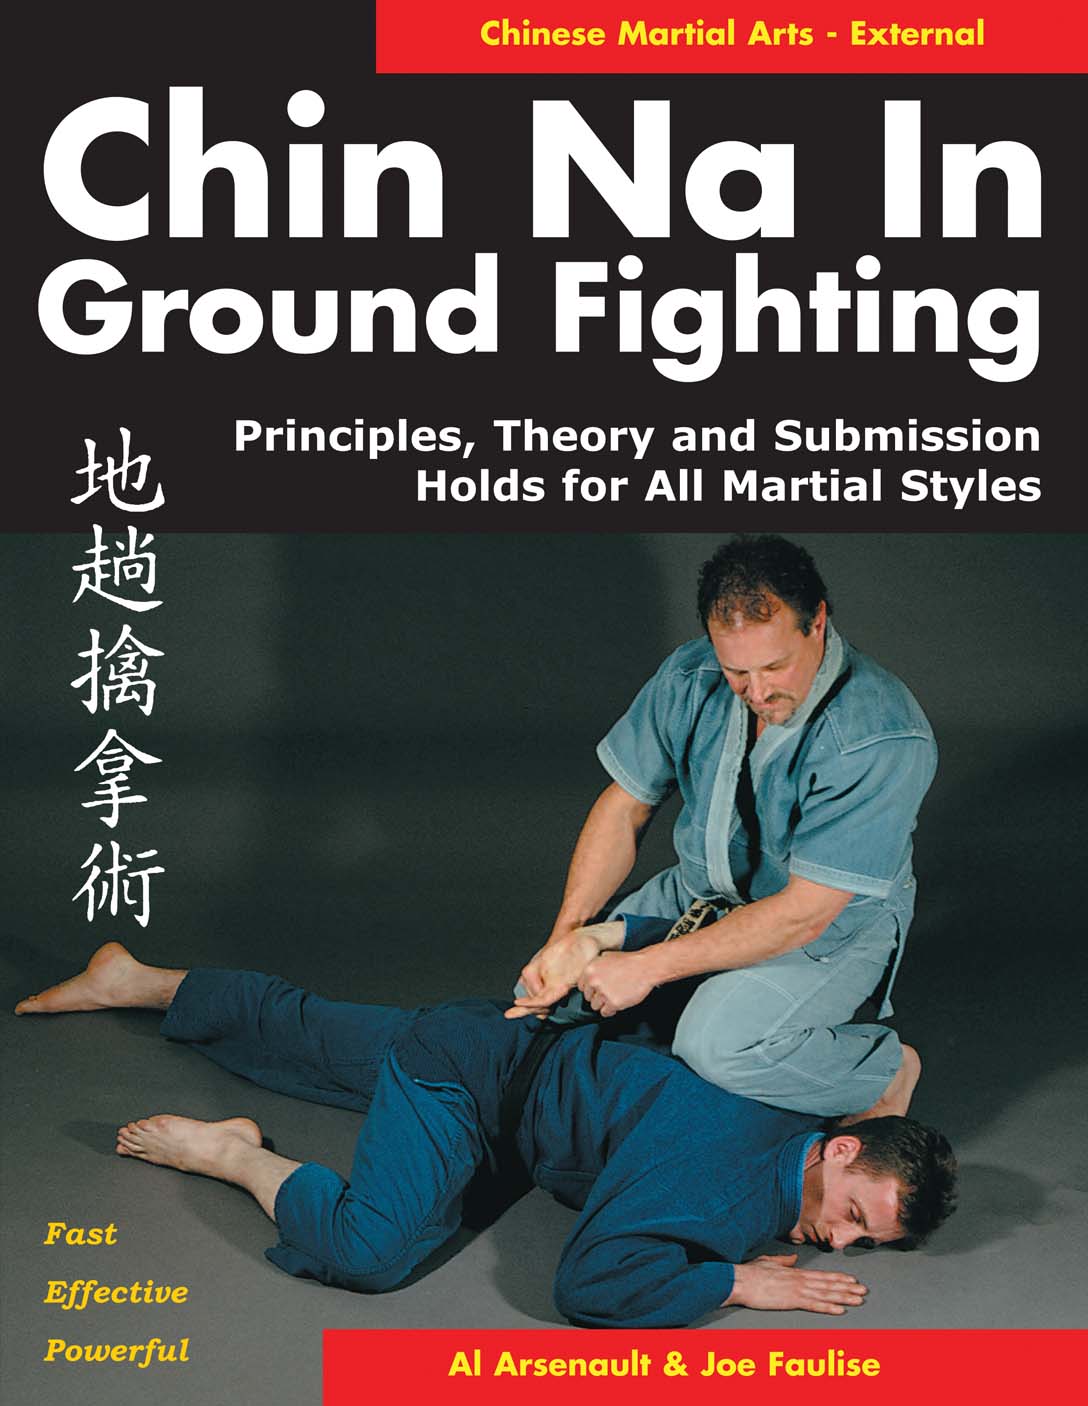 Chin Na in Ground Fighting—Principles, Theory and Submission Holds Book by Al Arsenault